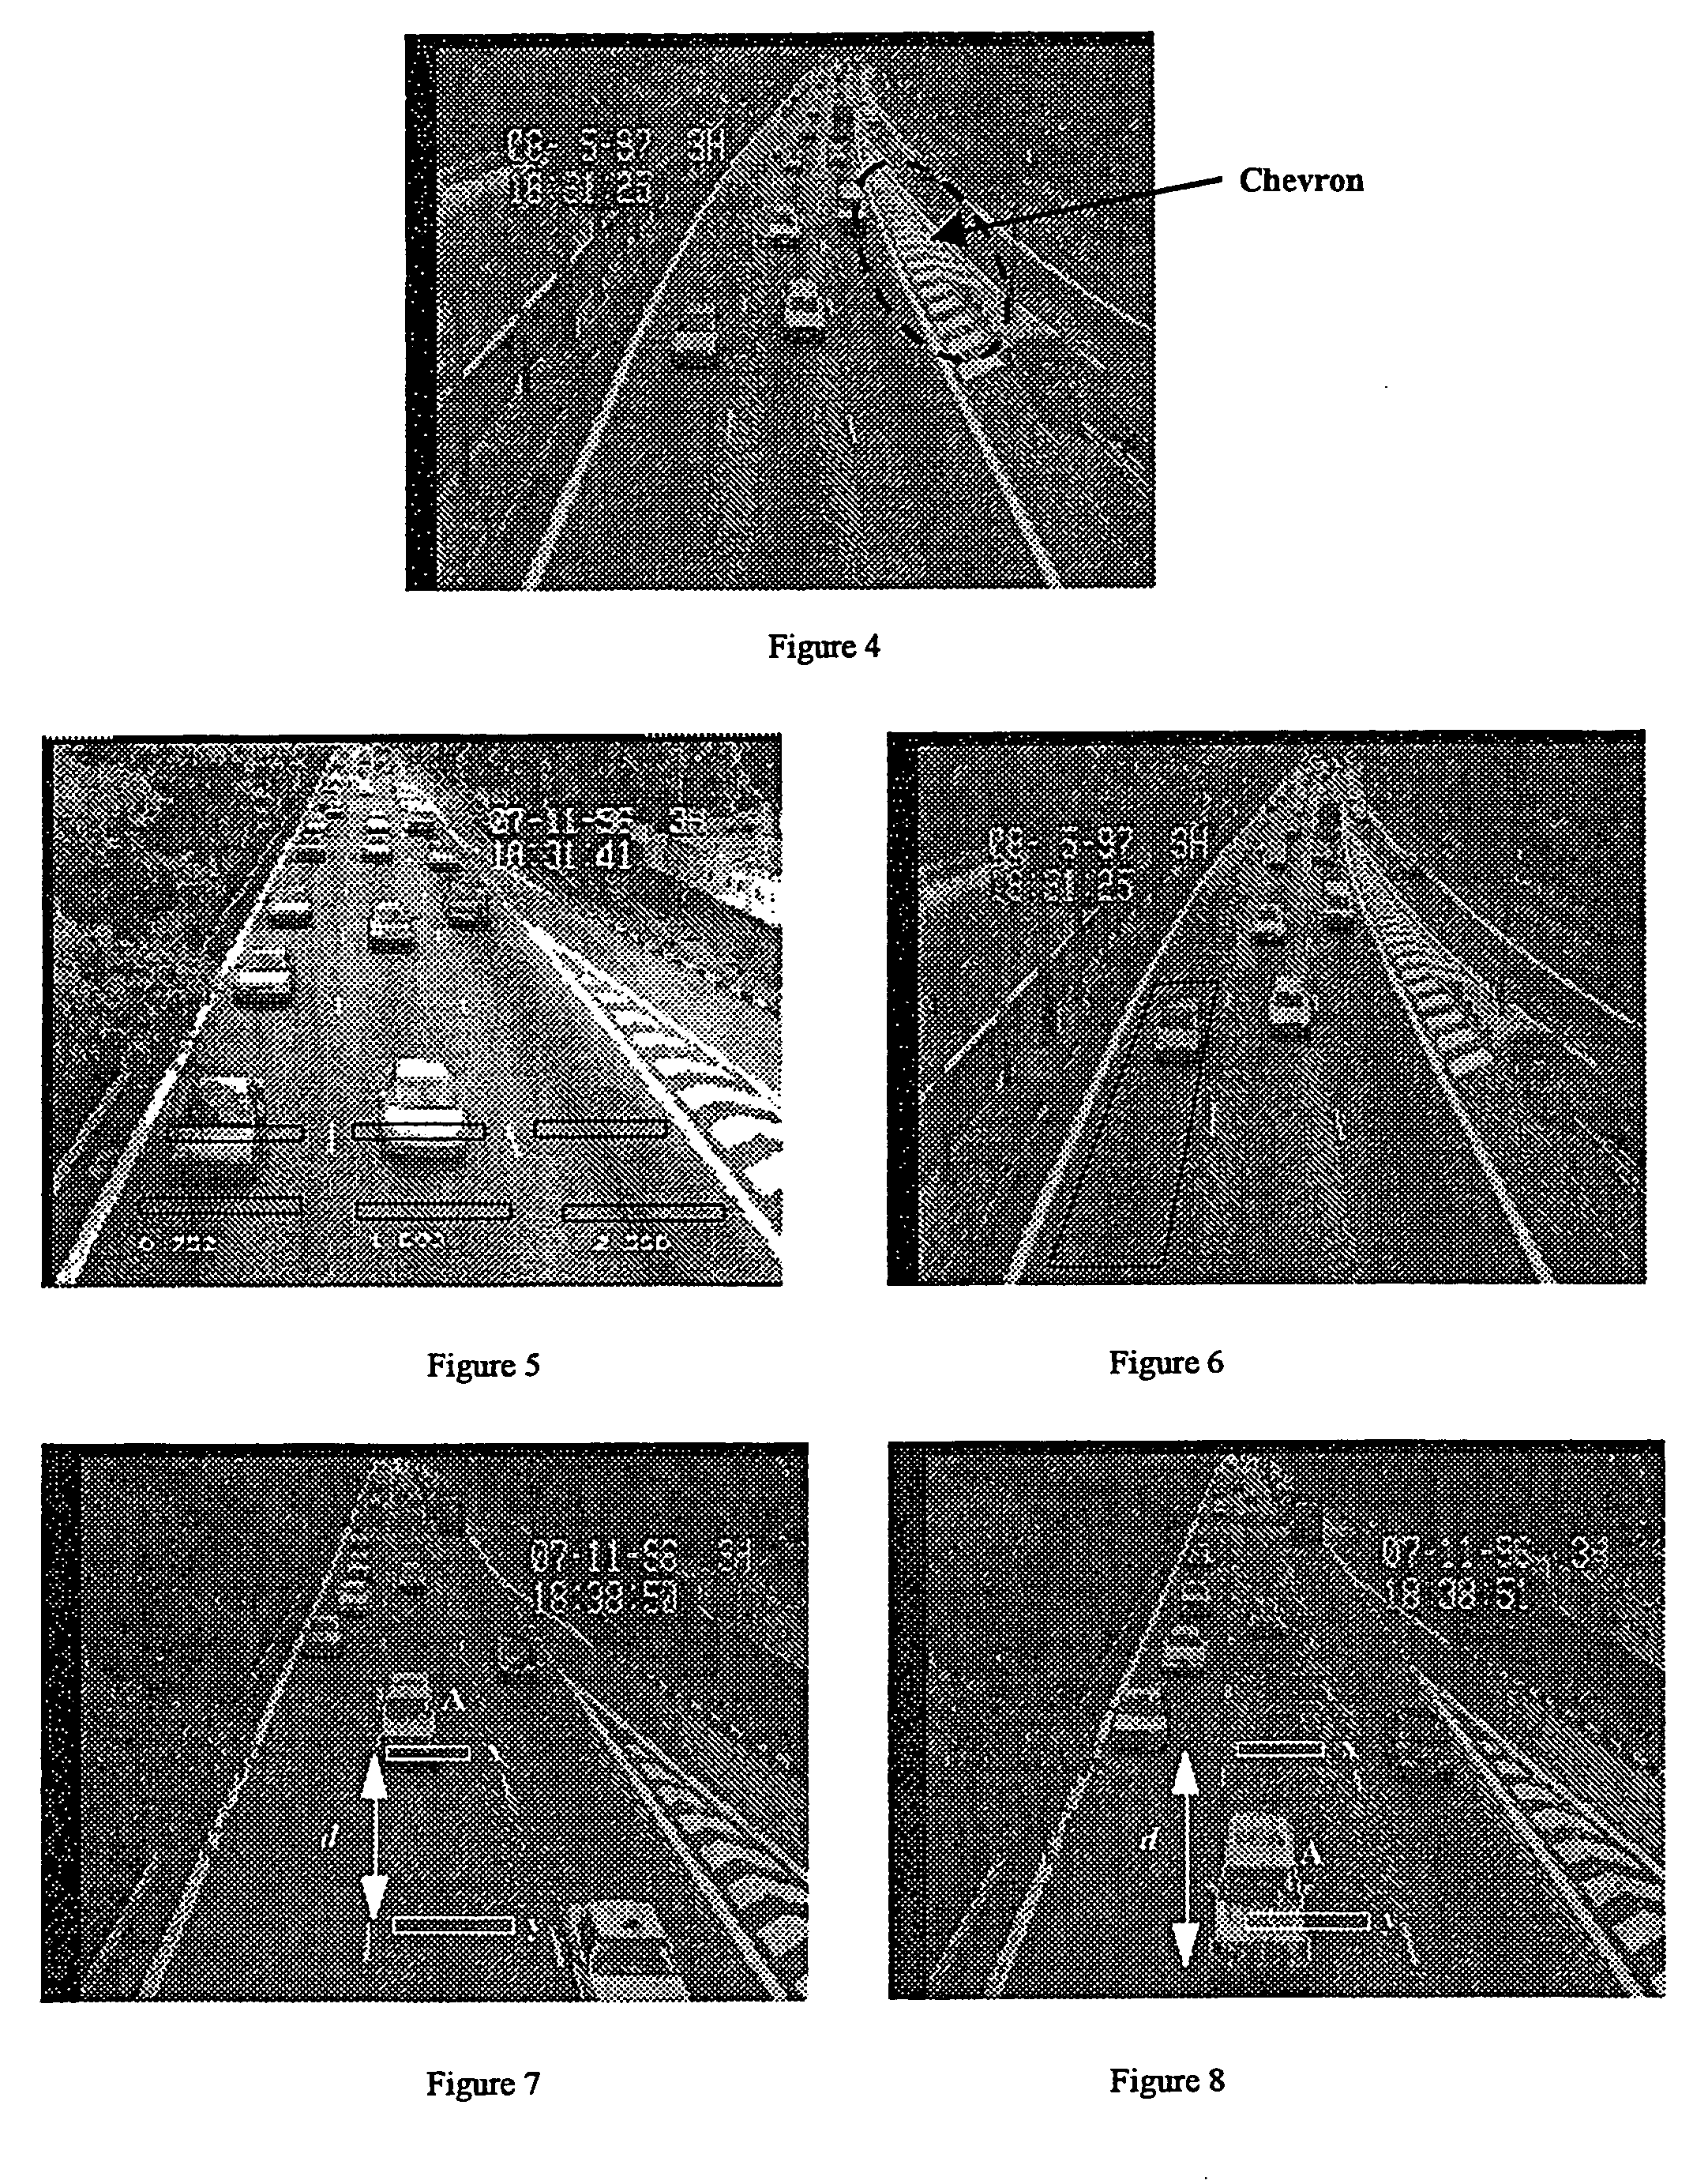 Image processing techniques for a video based traffic monitoring system and methods therefor